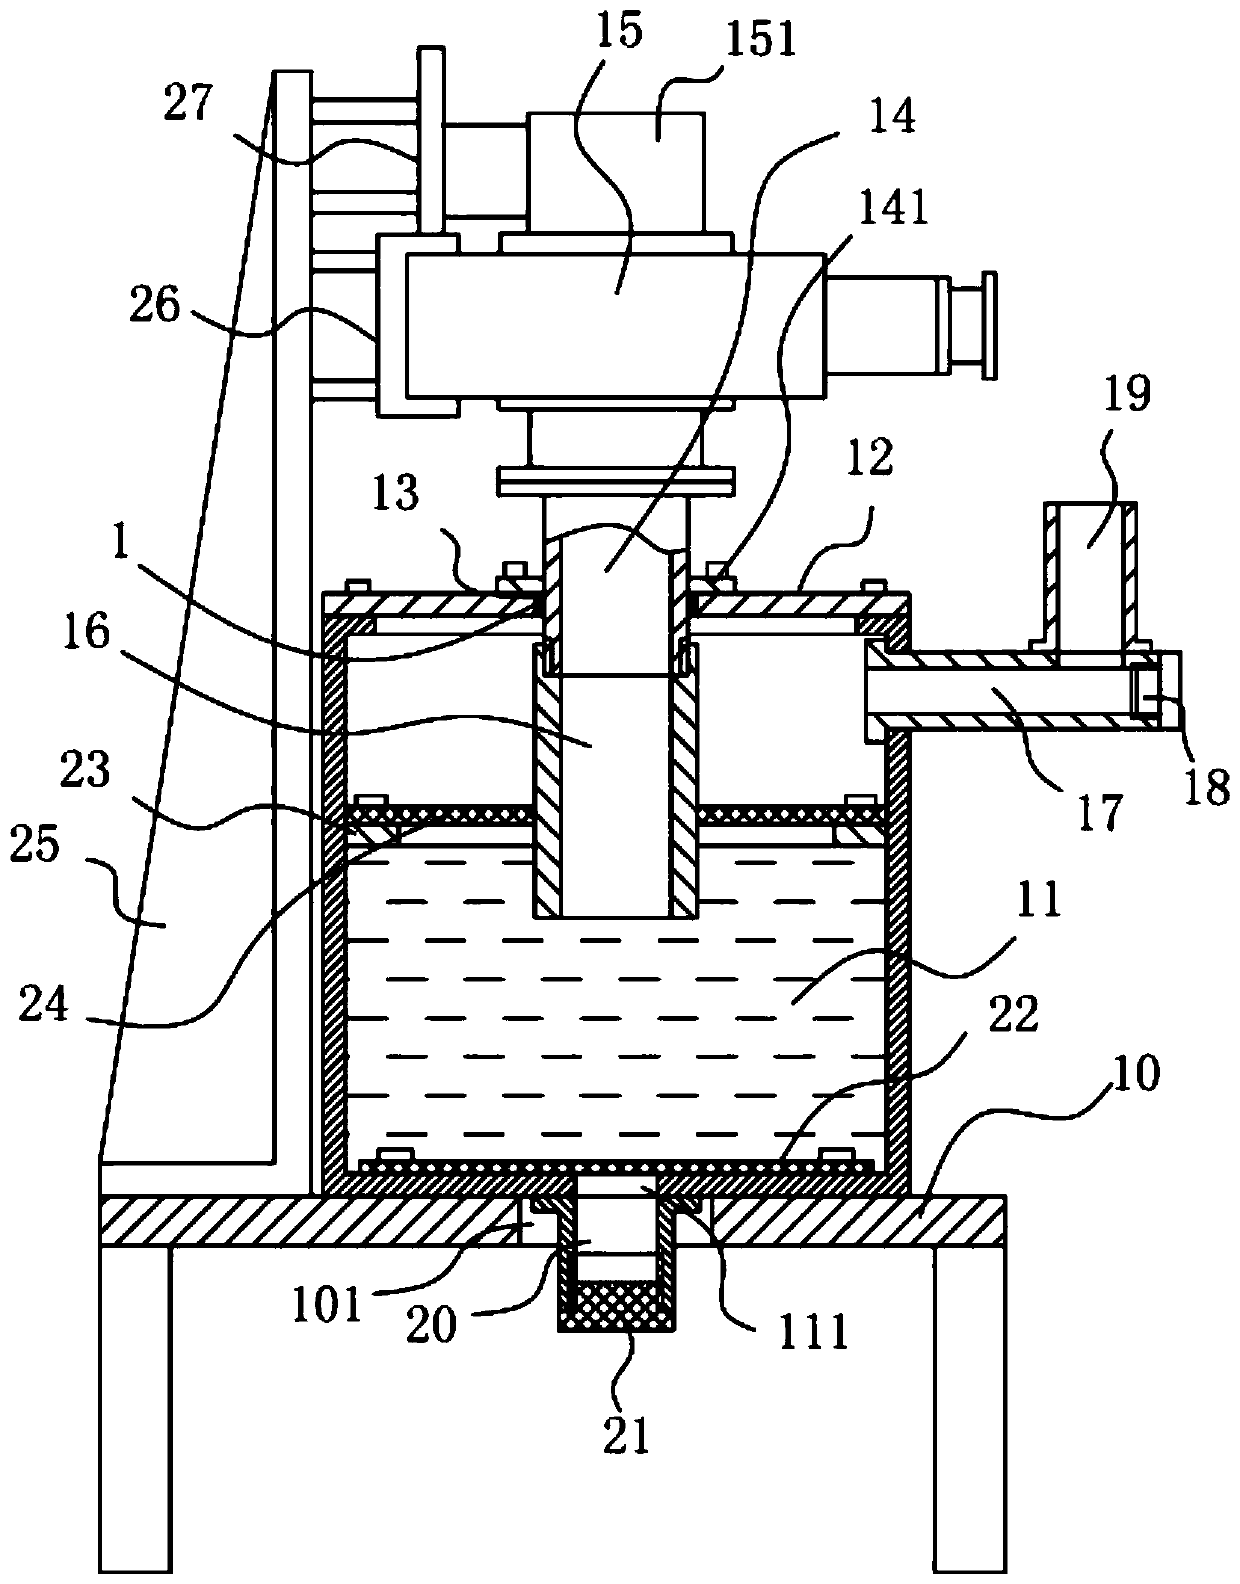 Small-size filter device having convenience in pipe cleaning